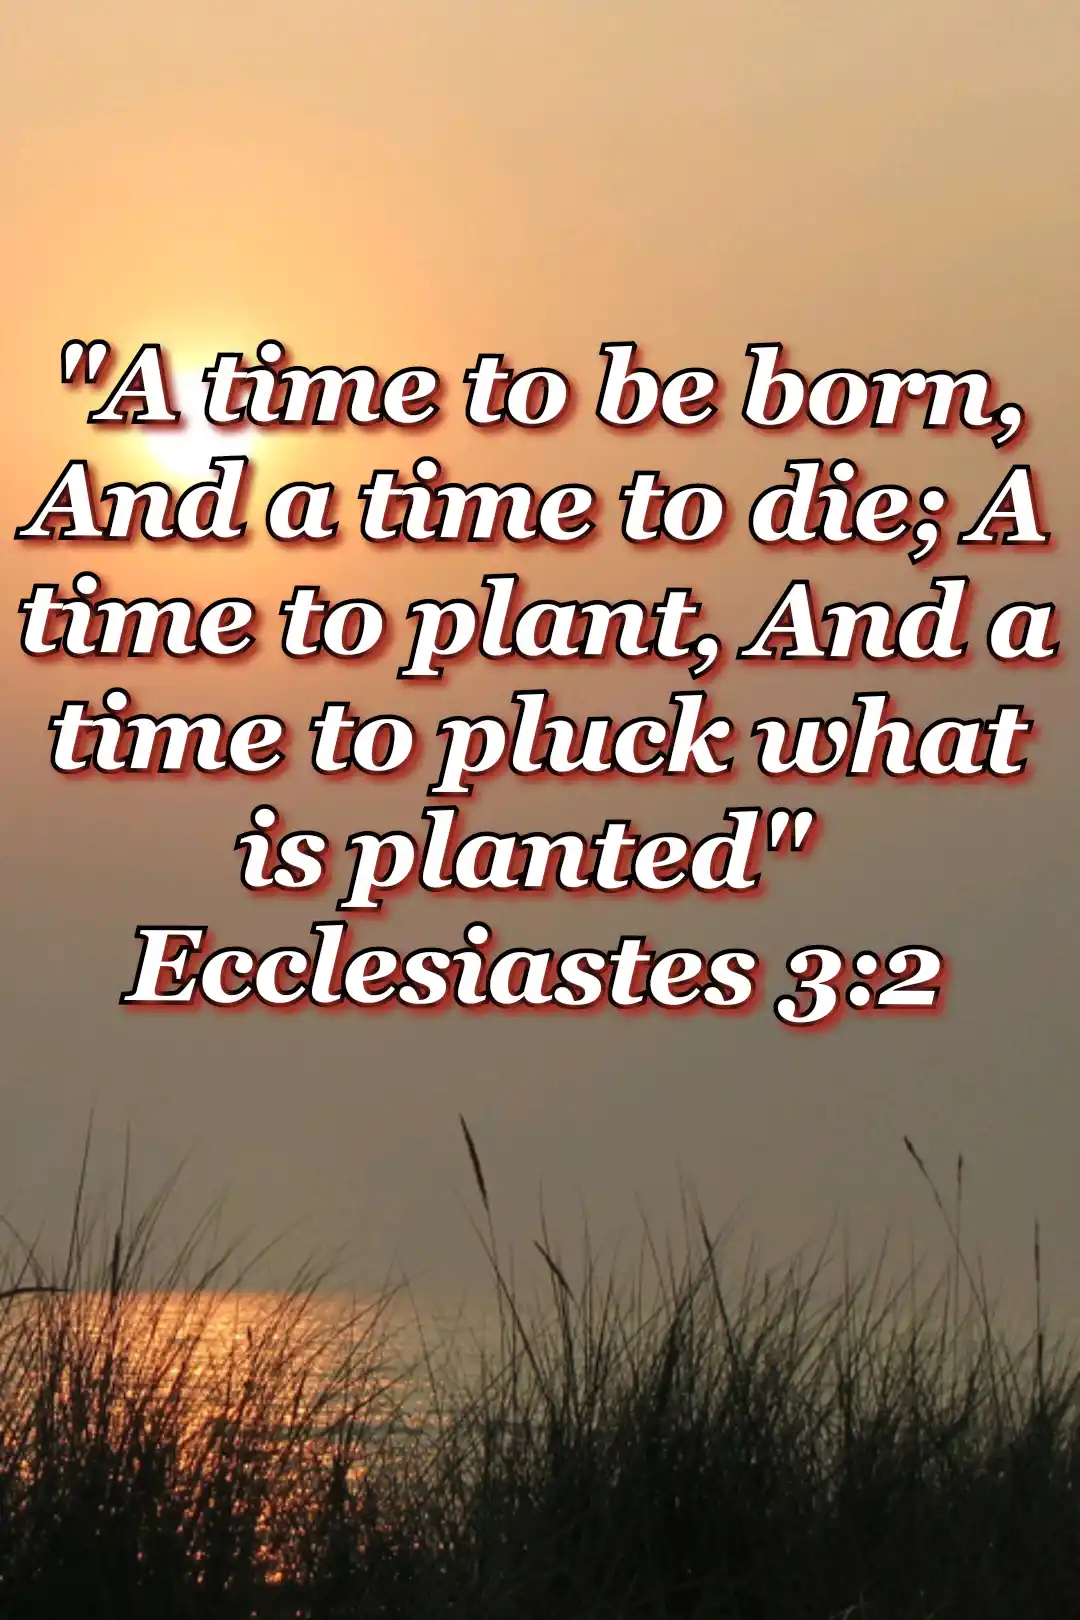 Bible-Verses_about_death-Image (Ecclesiastes 3:2)